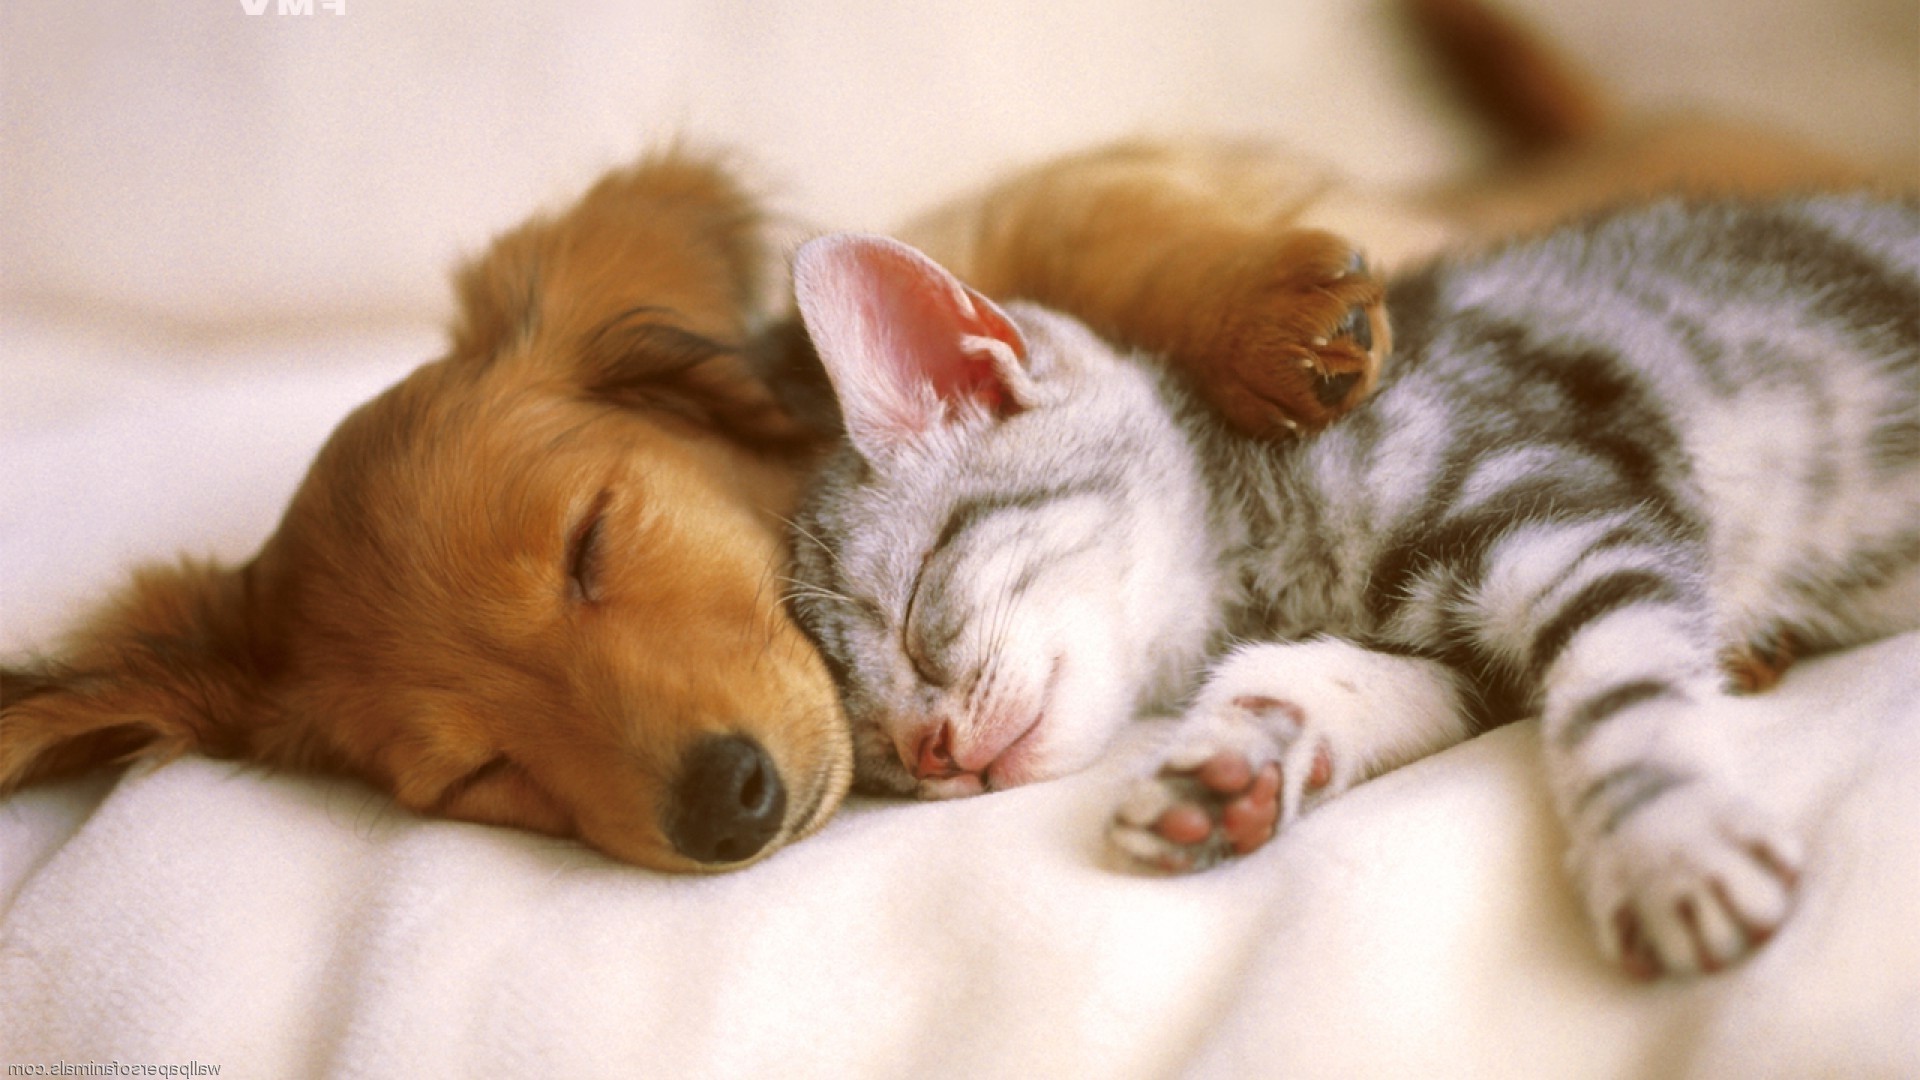 Cute Pets - Dogs And Cats Wallpaper Hd , HD Wallpaper & Backgrounds